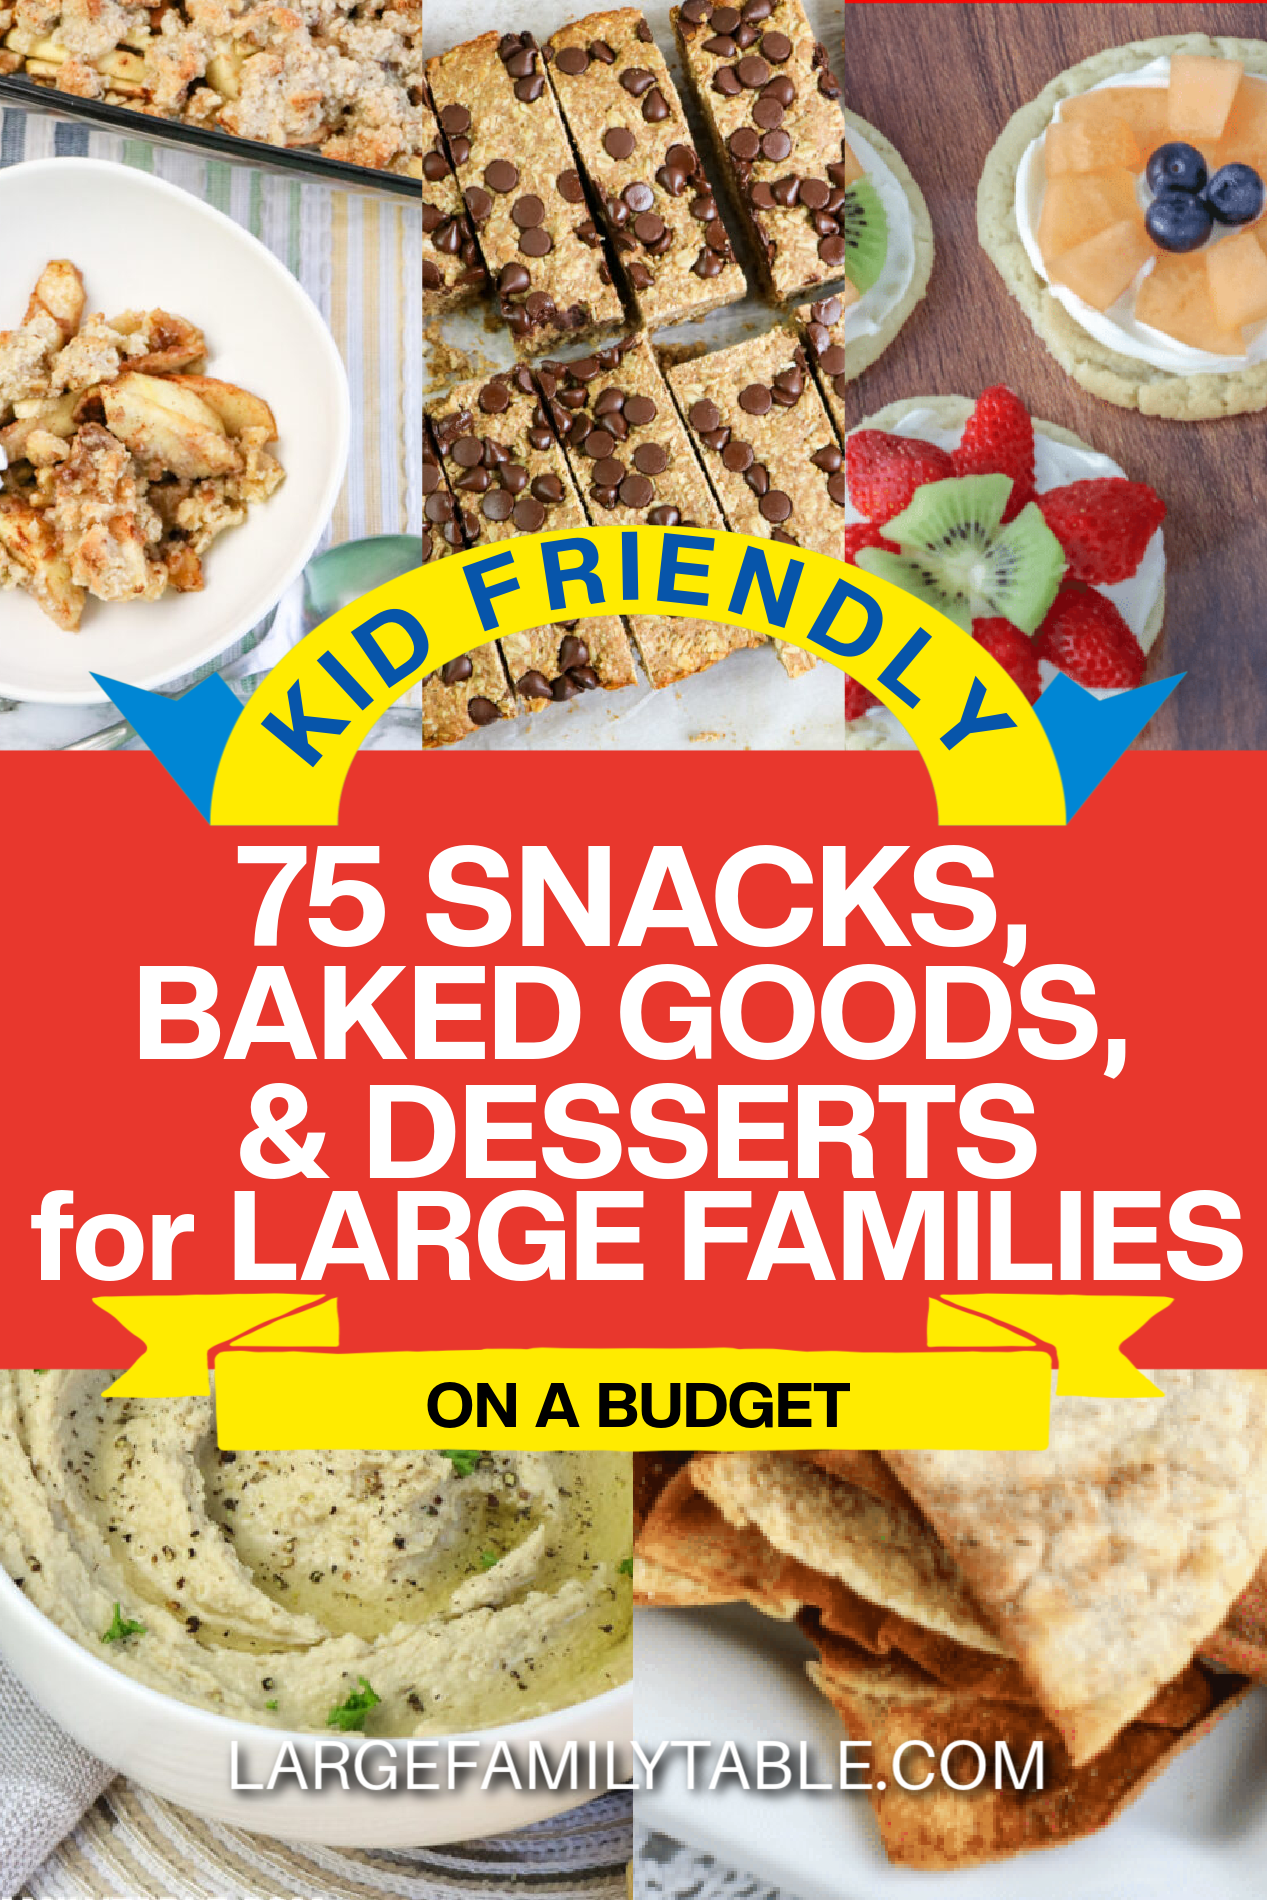 75 Kid-Friendly Snacks, Baked Goods, and Desserts for Large Families on a Budget